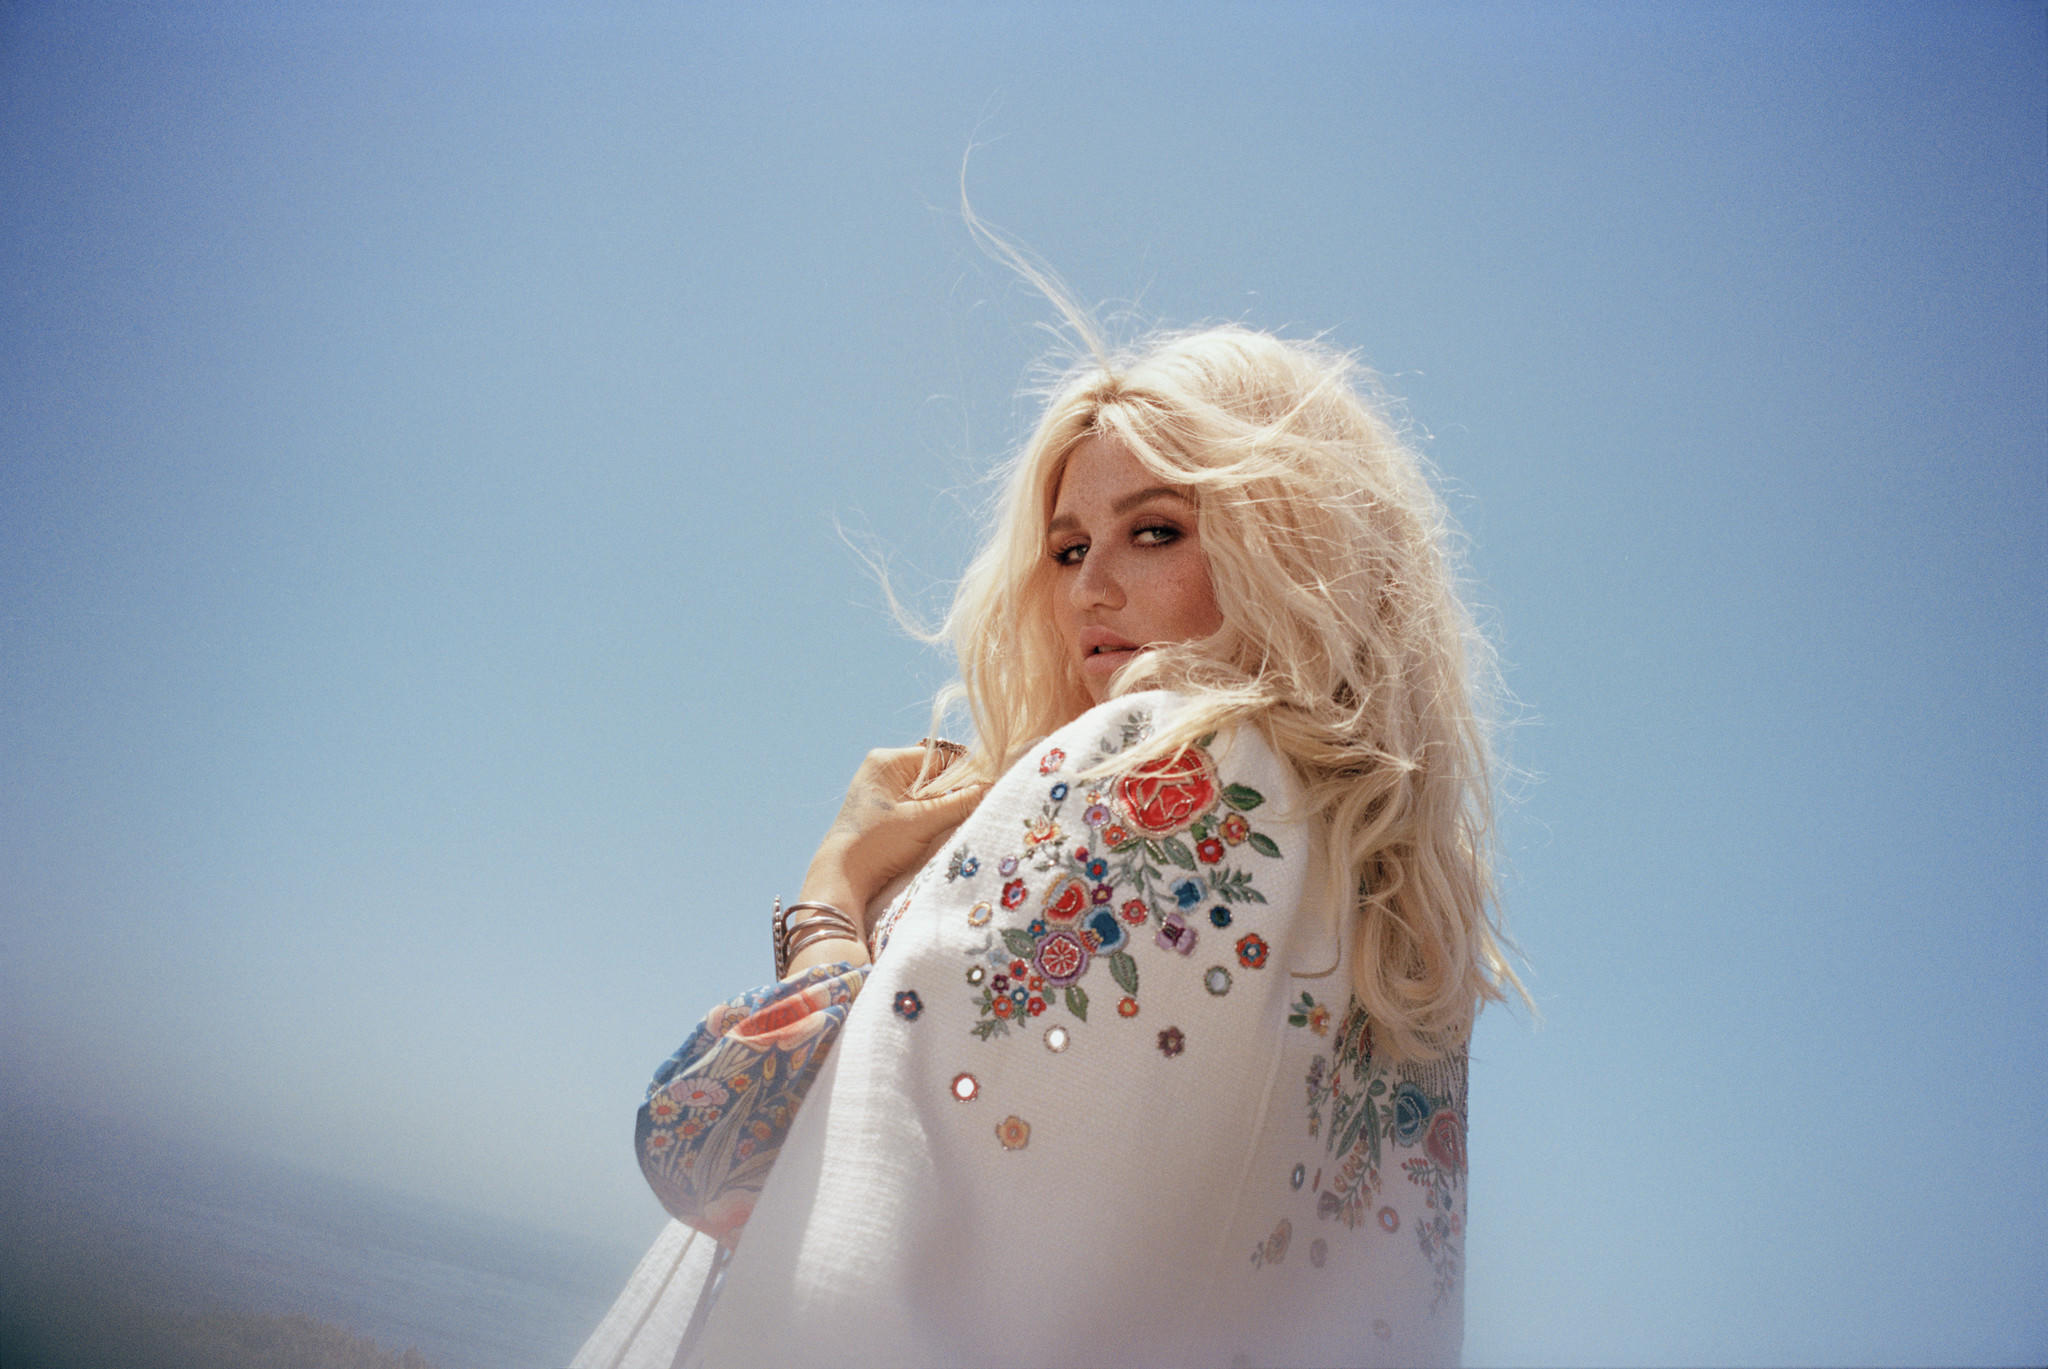 Behind the knee injury which forced Kesha to postpone Australian tour, “I tried to will this injury away”